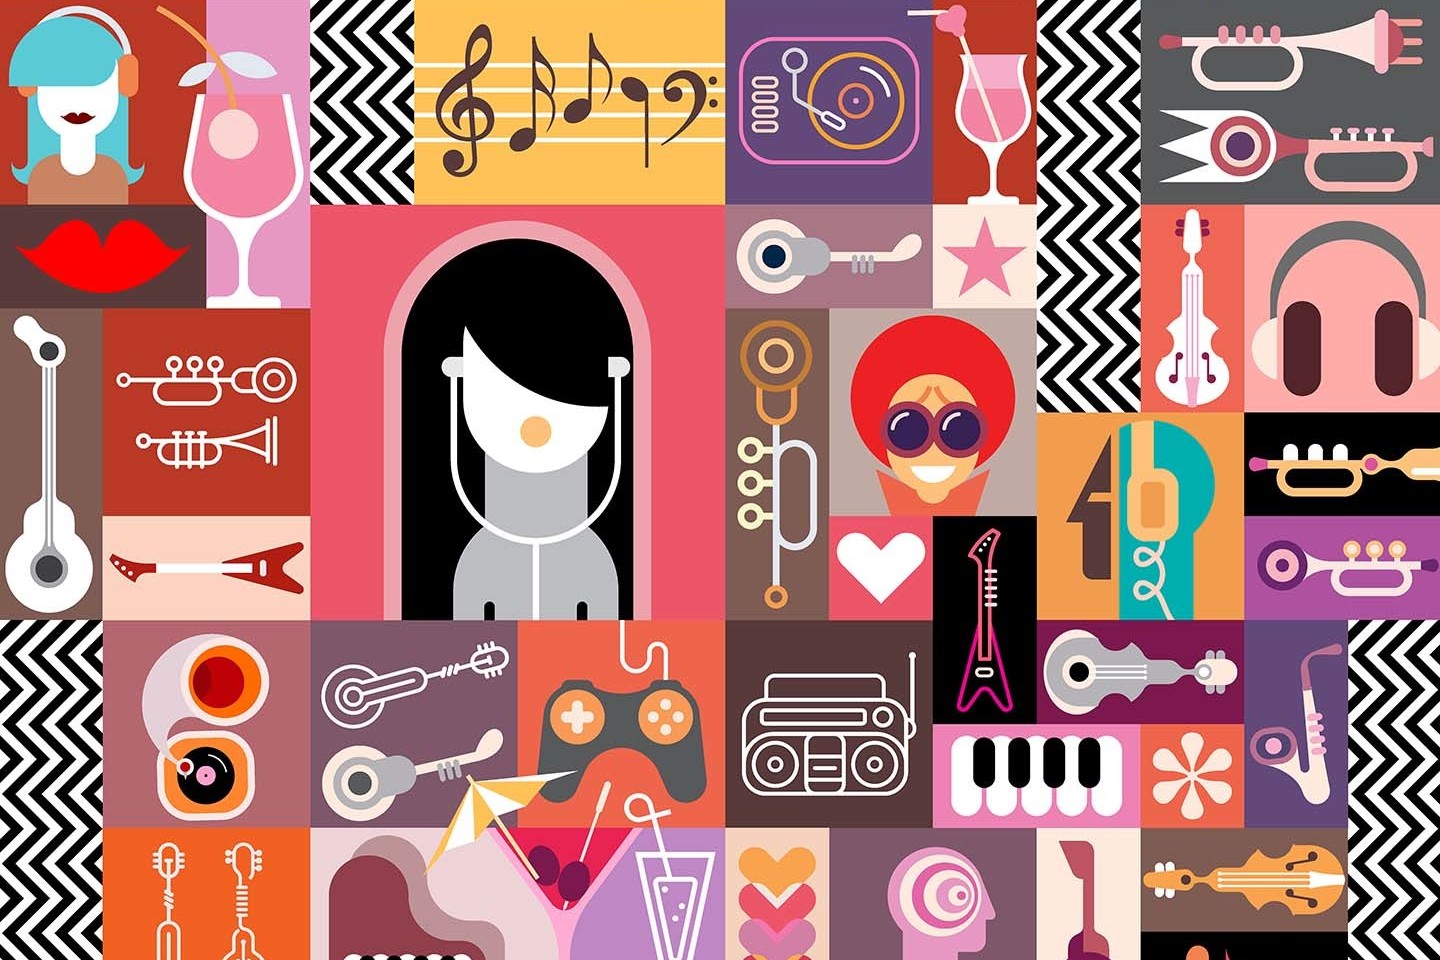 32 Great Websites for Free Vector Art, Images, Graphics, and Icons